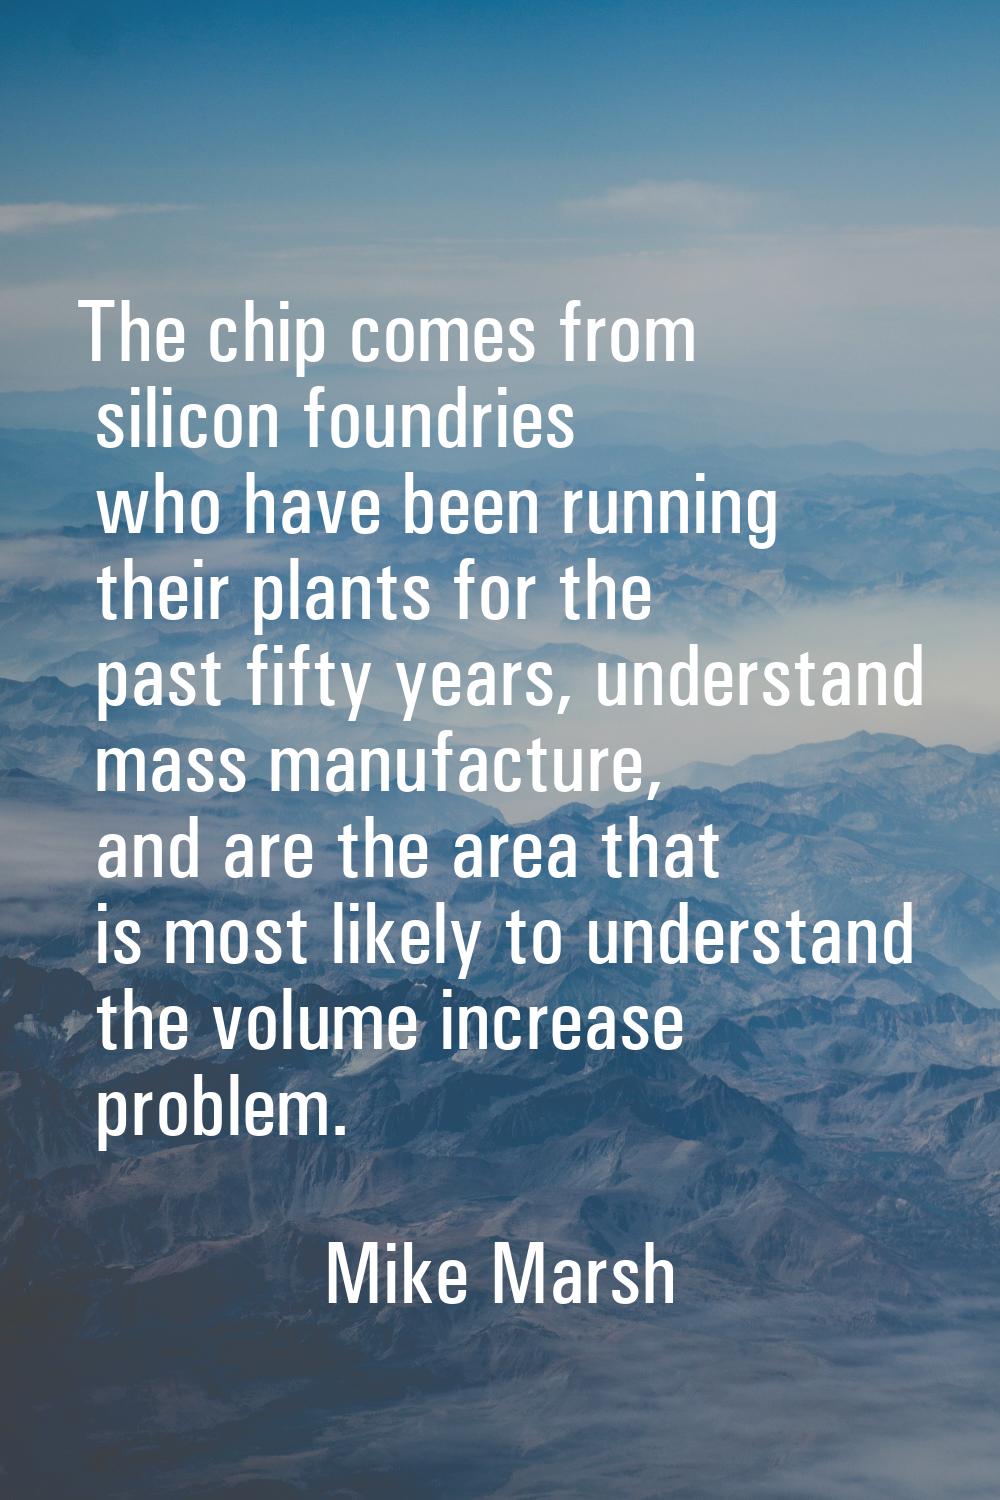 The chip comes from silicon foundries who have been running their plants for the past fifty years, 